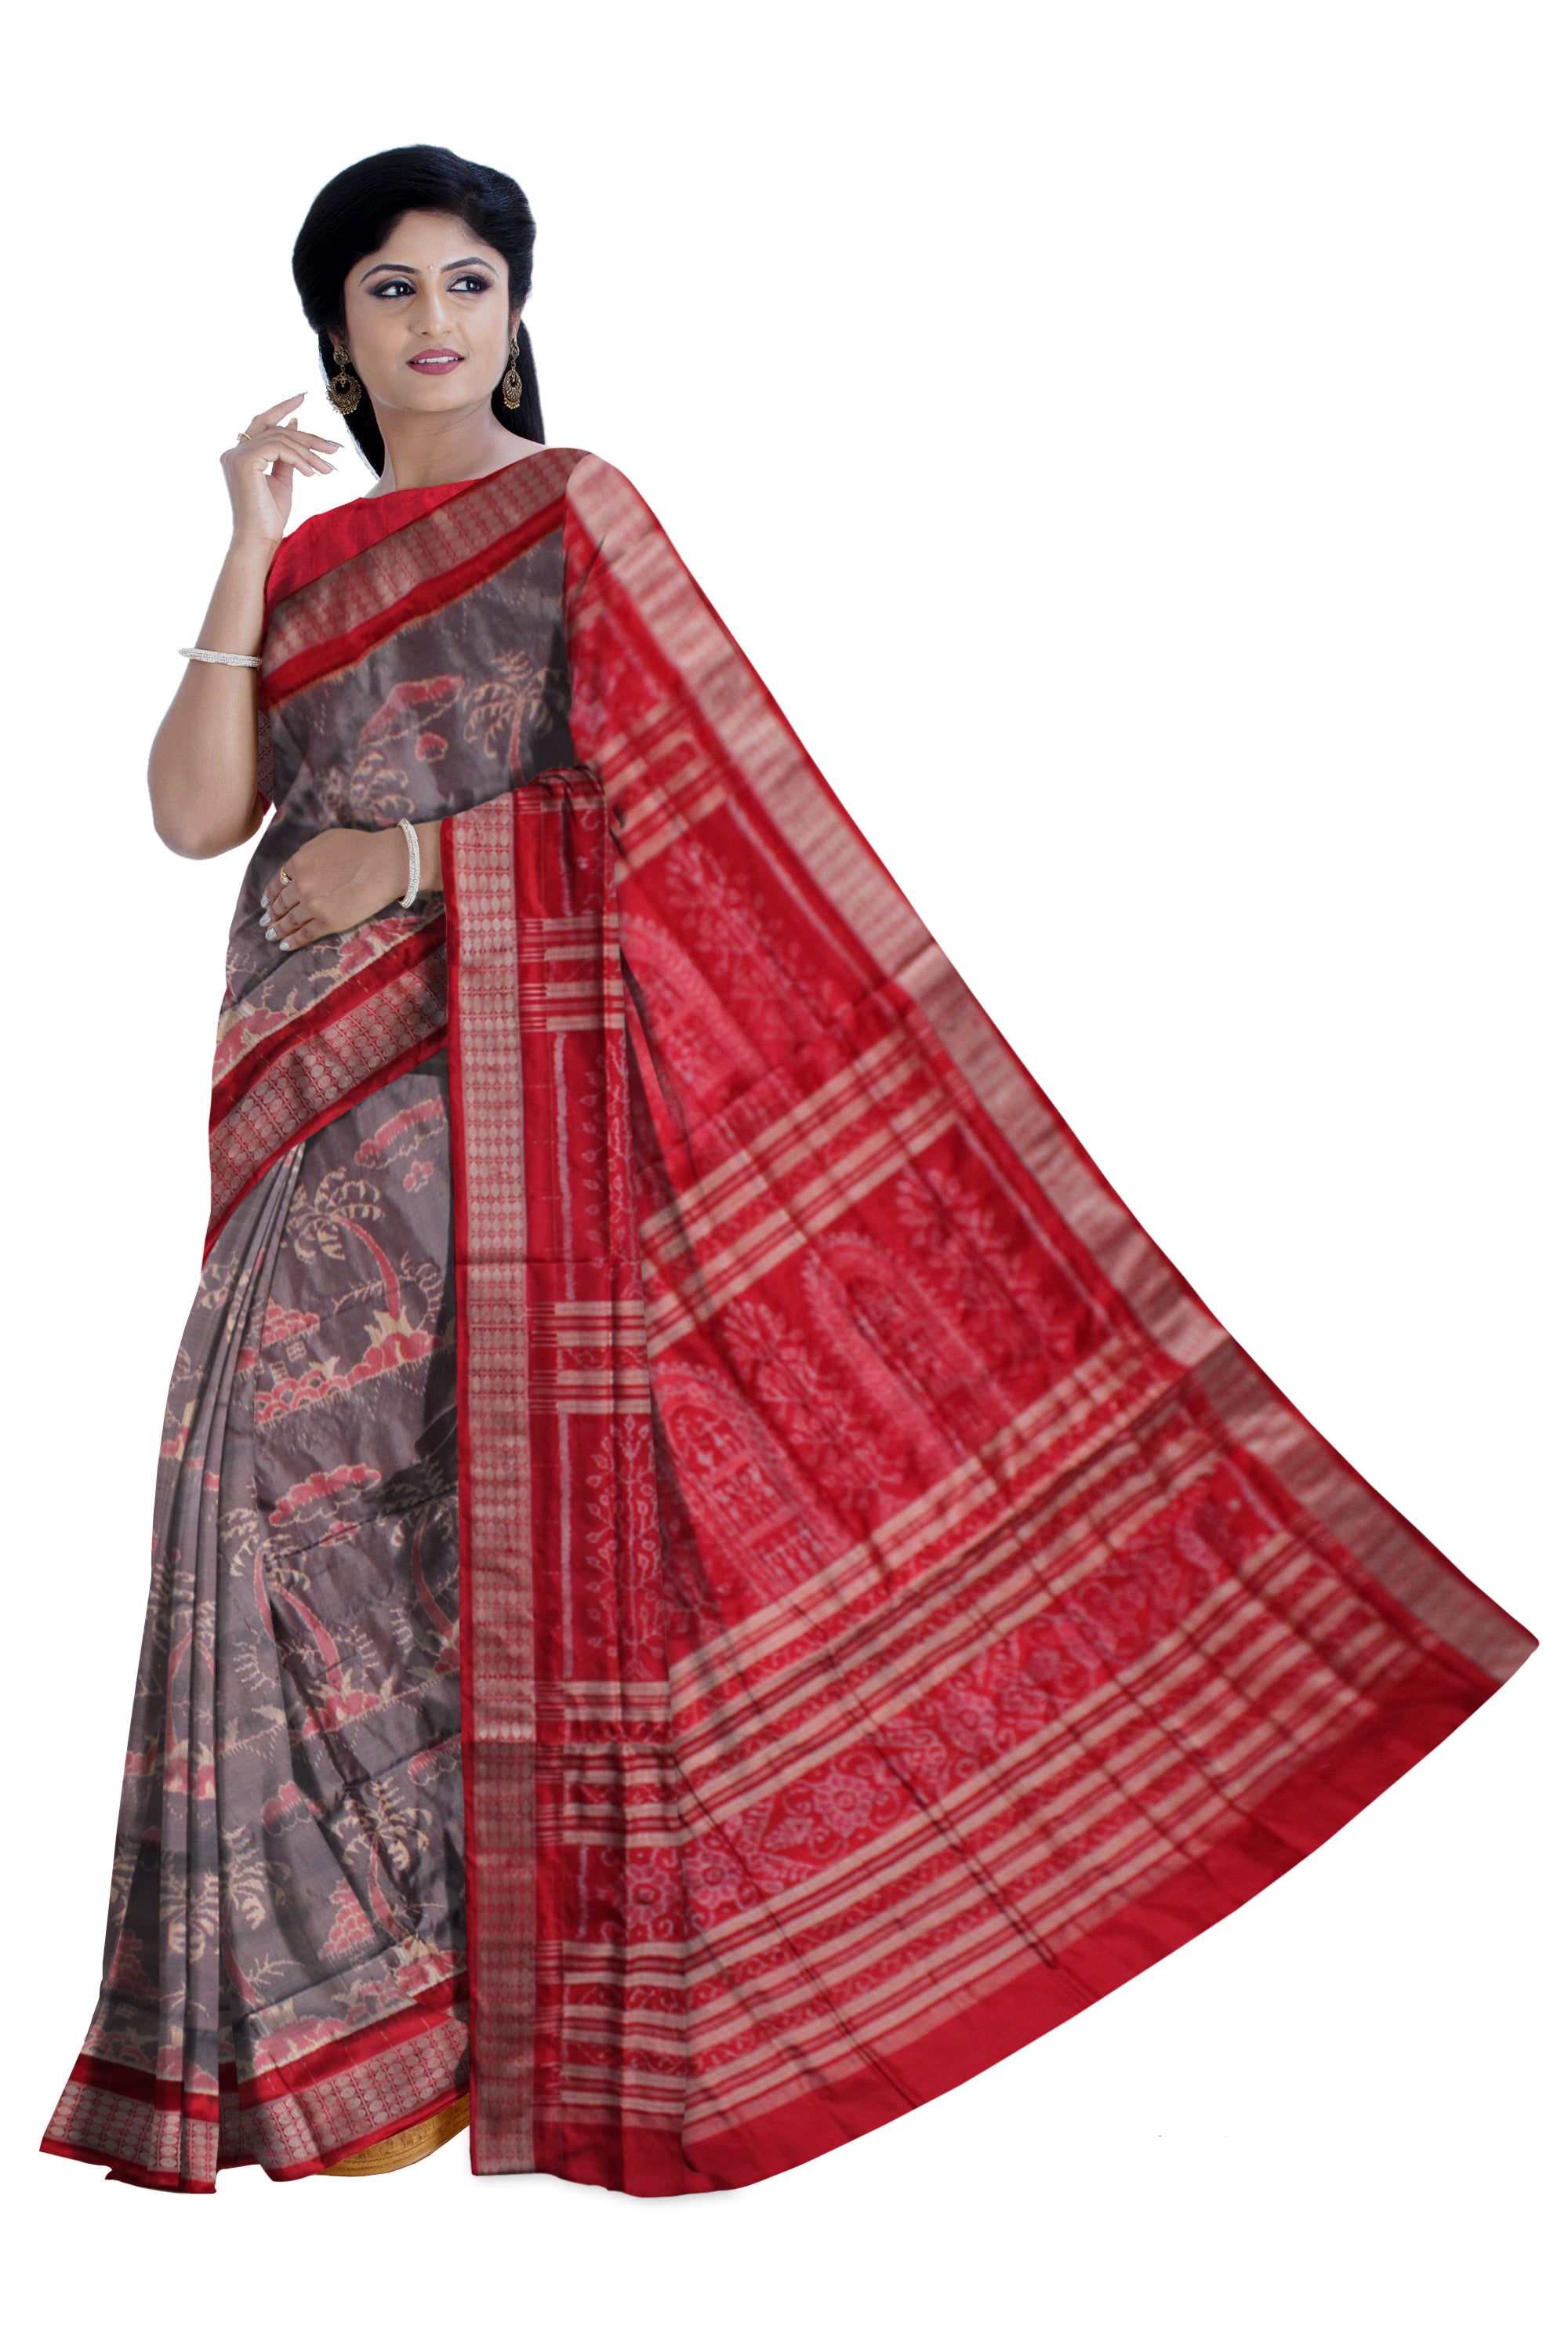 SMALL HOUSE AND TREE PATTERN PURE SILK SAREE IS GREY AND RED COLOR BASE,AVAILABLE WITH MATCHING BLOUSE PIECE. - Koshali Arts & Crafts Enterprise